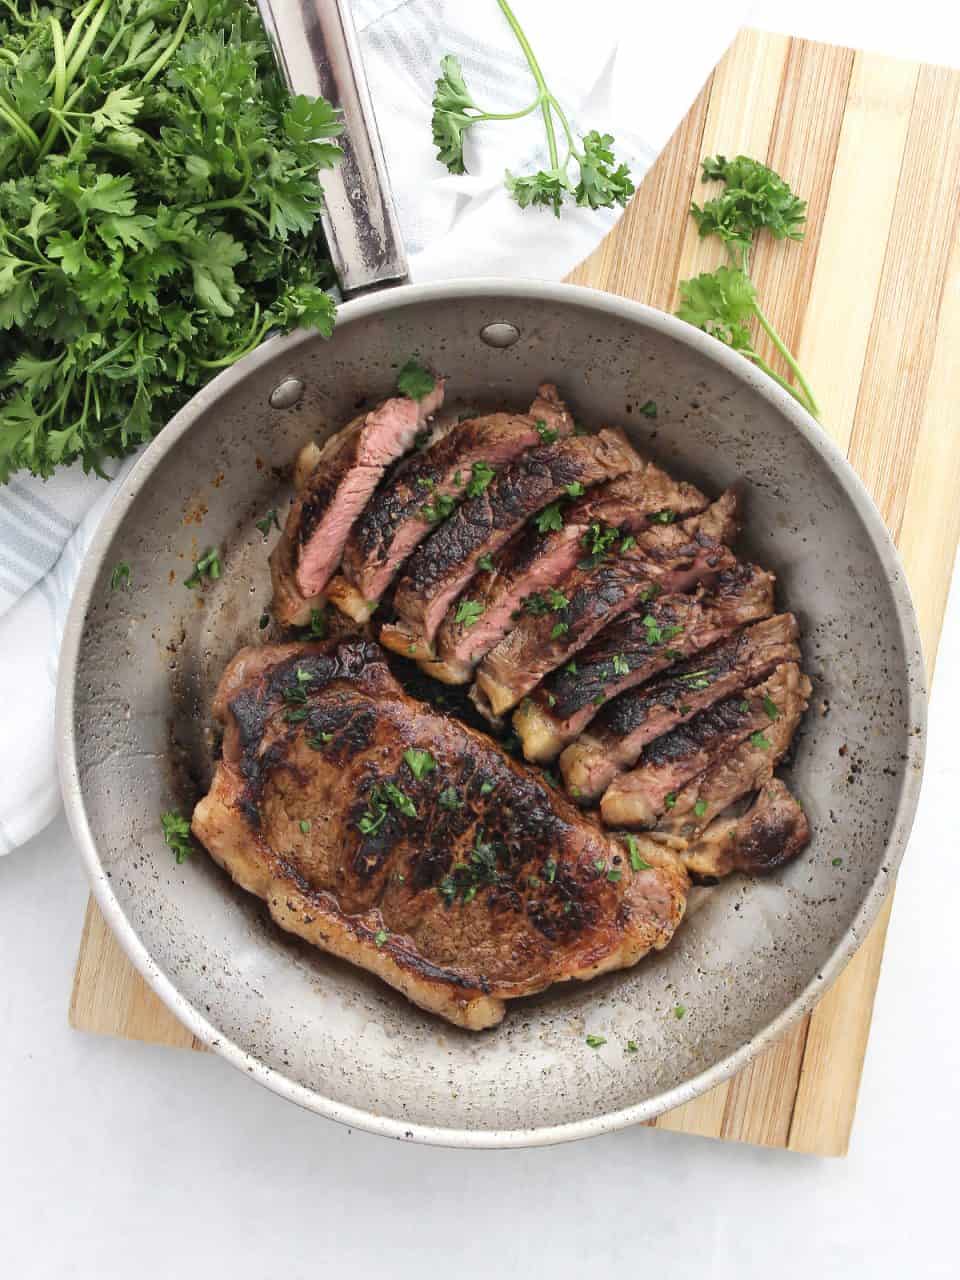 Two reverse seared cola marinated steaks in a skillet with one cut into slices and garnished with parsley.